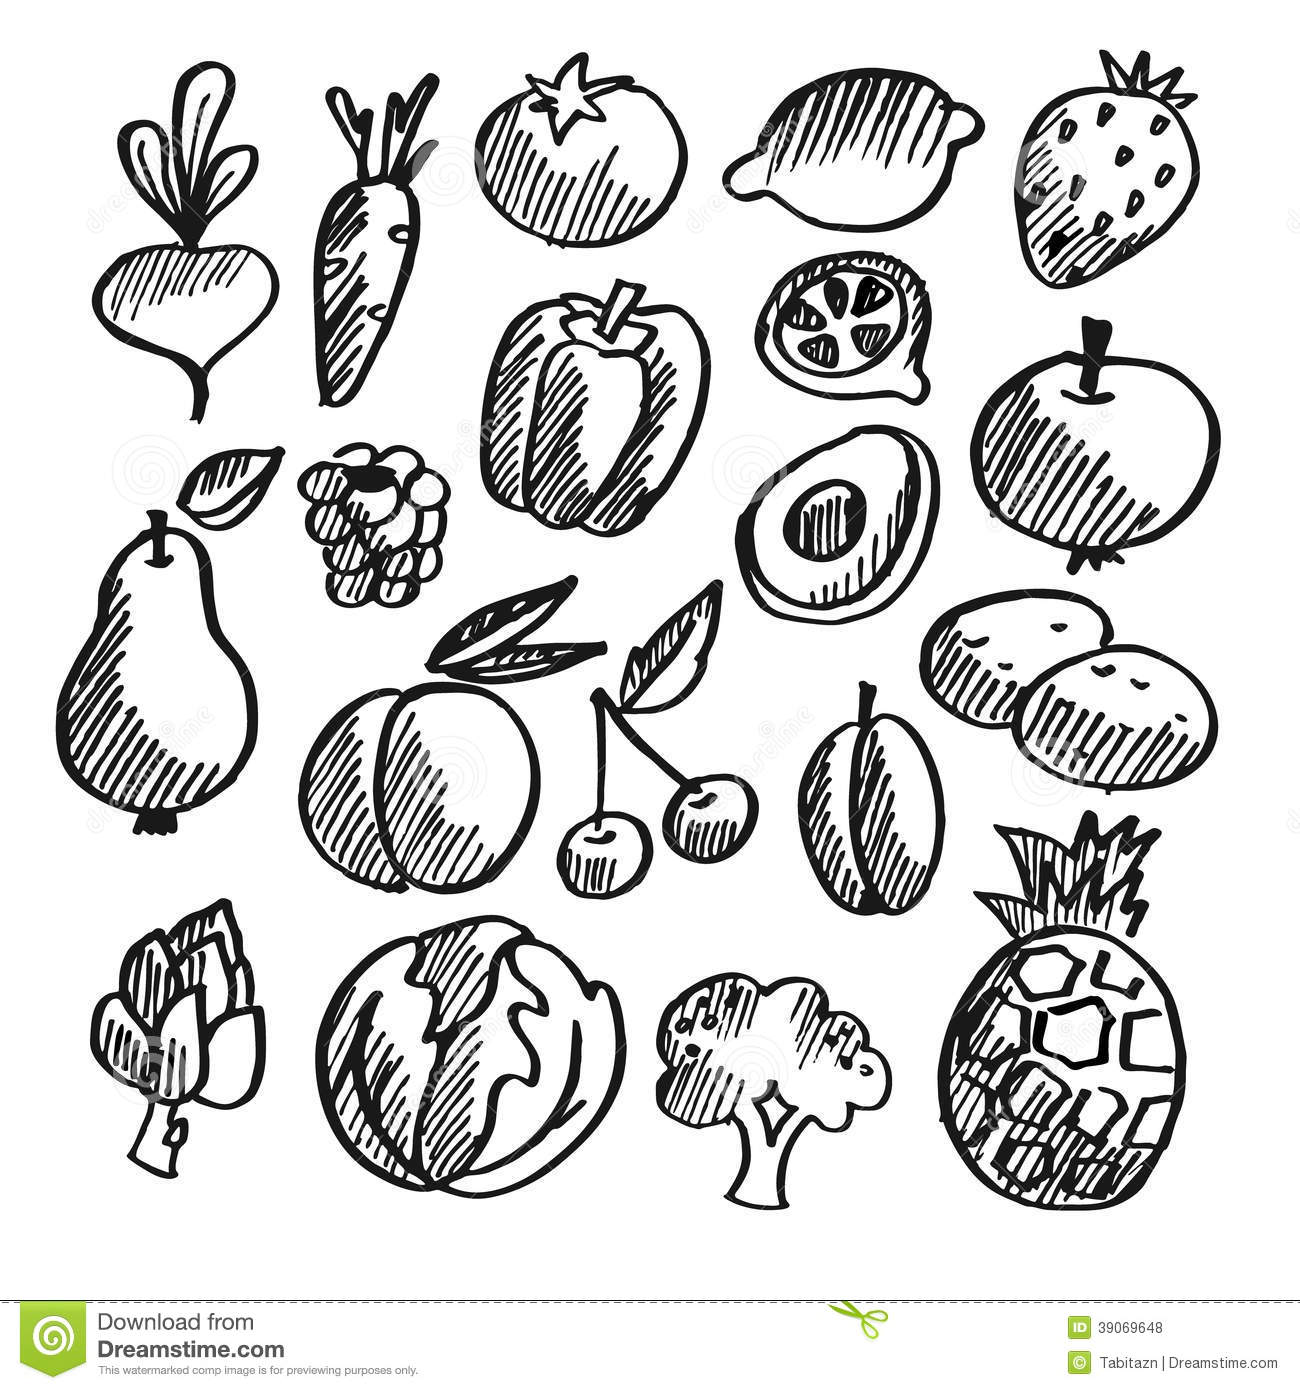 Vegetable and fruits